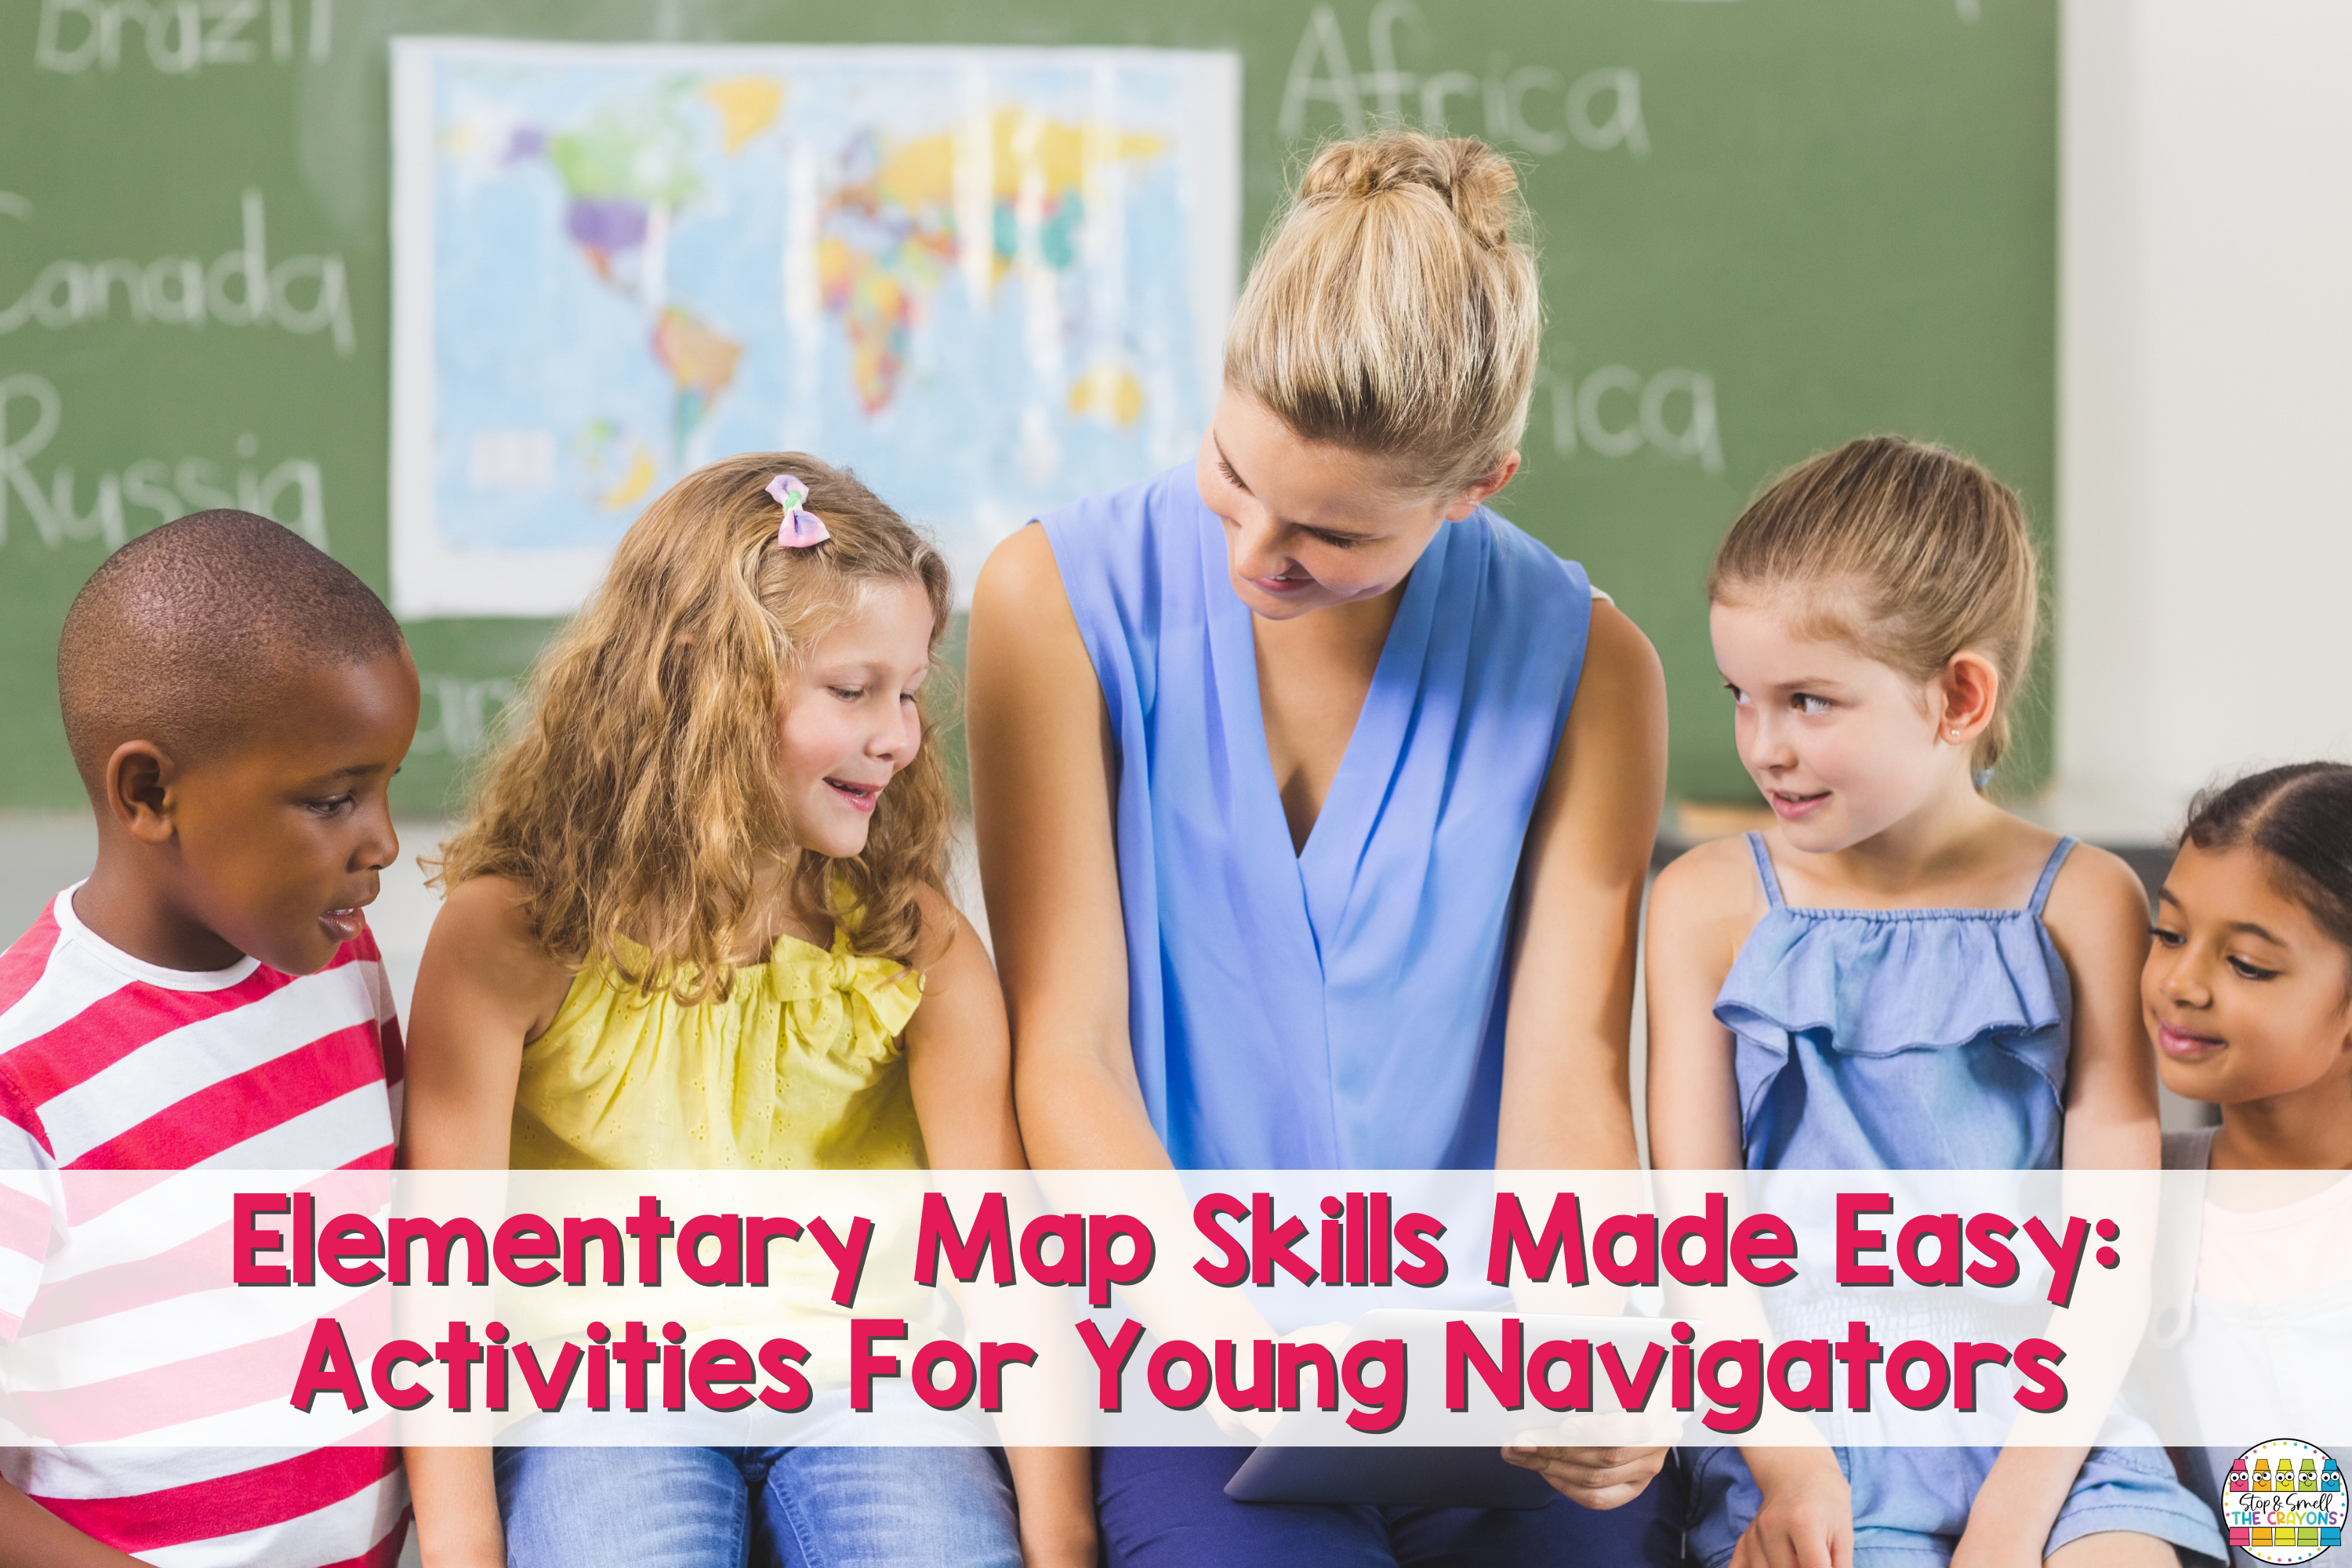 Teaching map skills to elementary students is fun and easy with these engaging activities everyone will love.